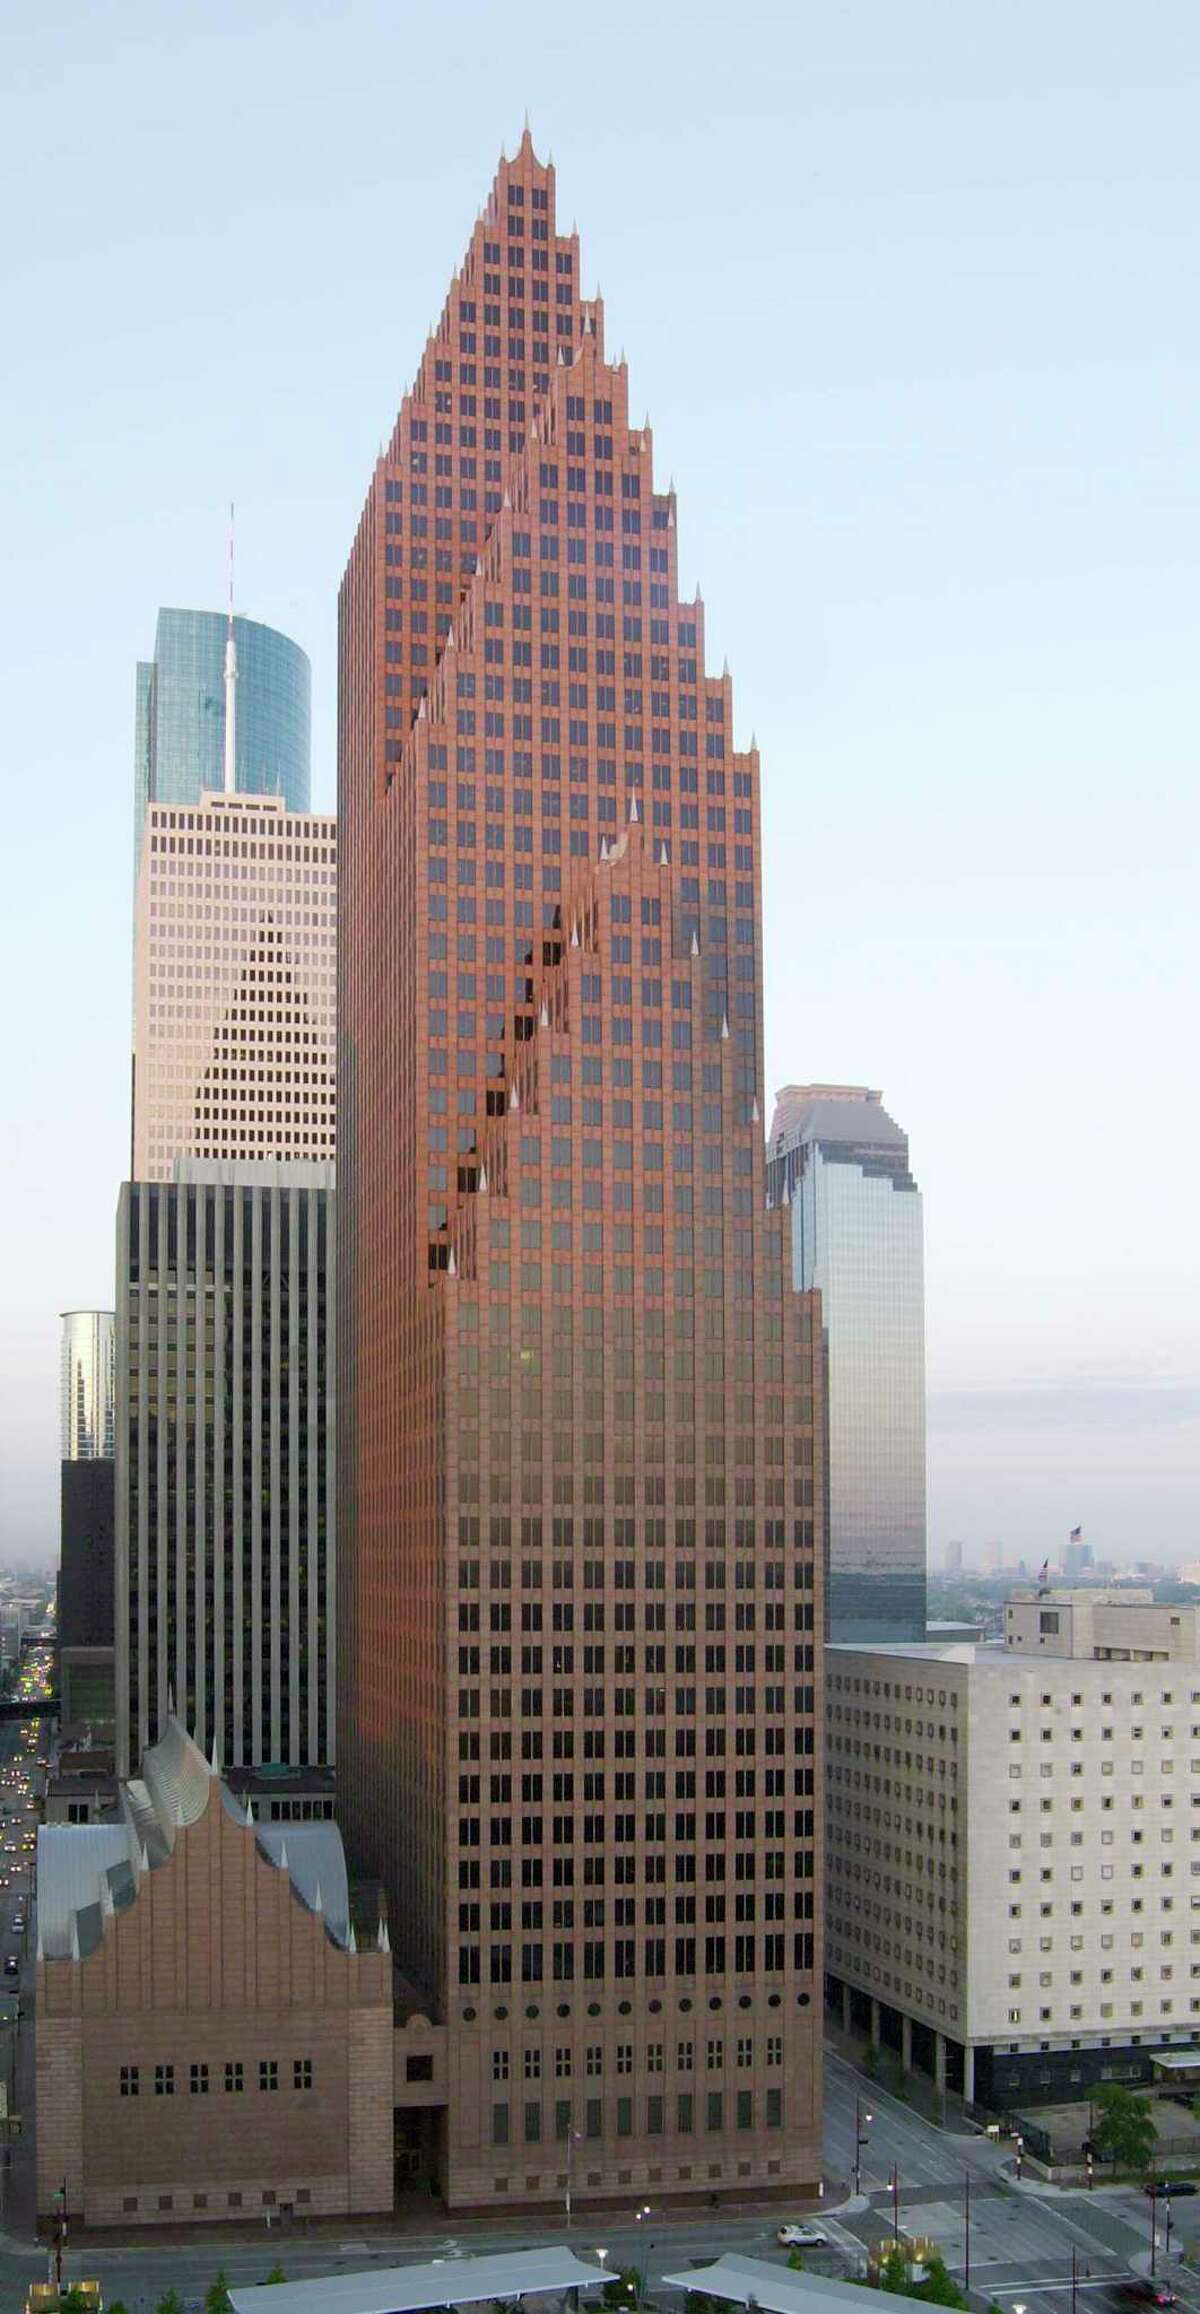 Bank of America Center, a 56-story, 1.2 million-square-foot building at 700 Louisiana in the Theater District, was designed by architects Philip Johnson and John Burgee. Developed by Hines, the building was completed in 1983.﻿